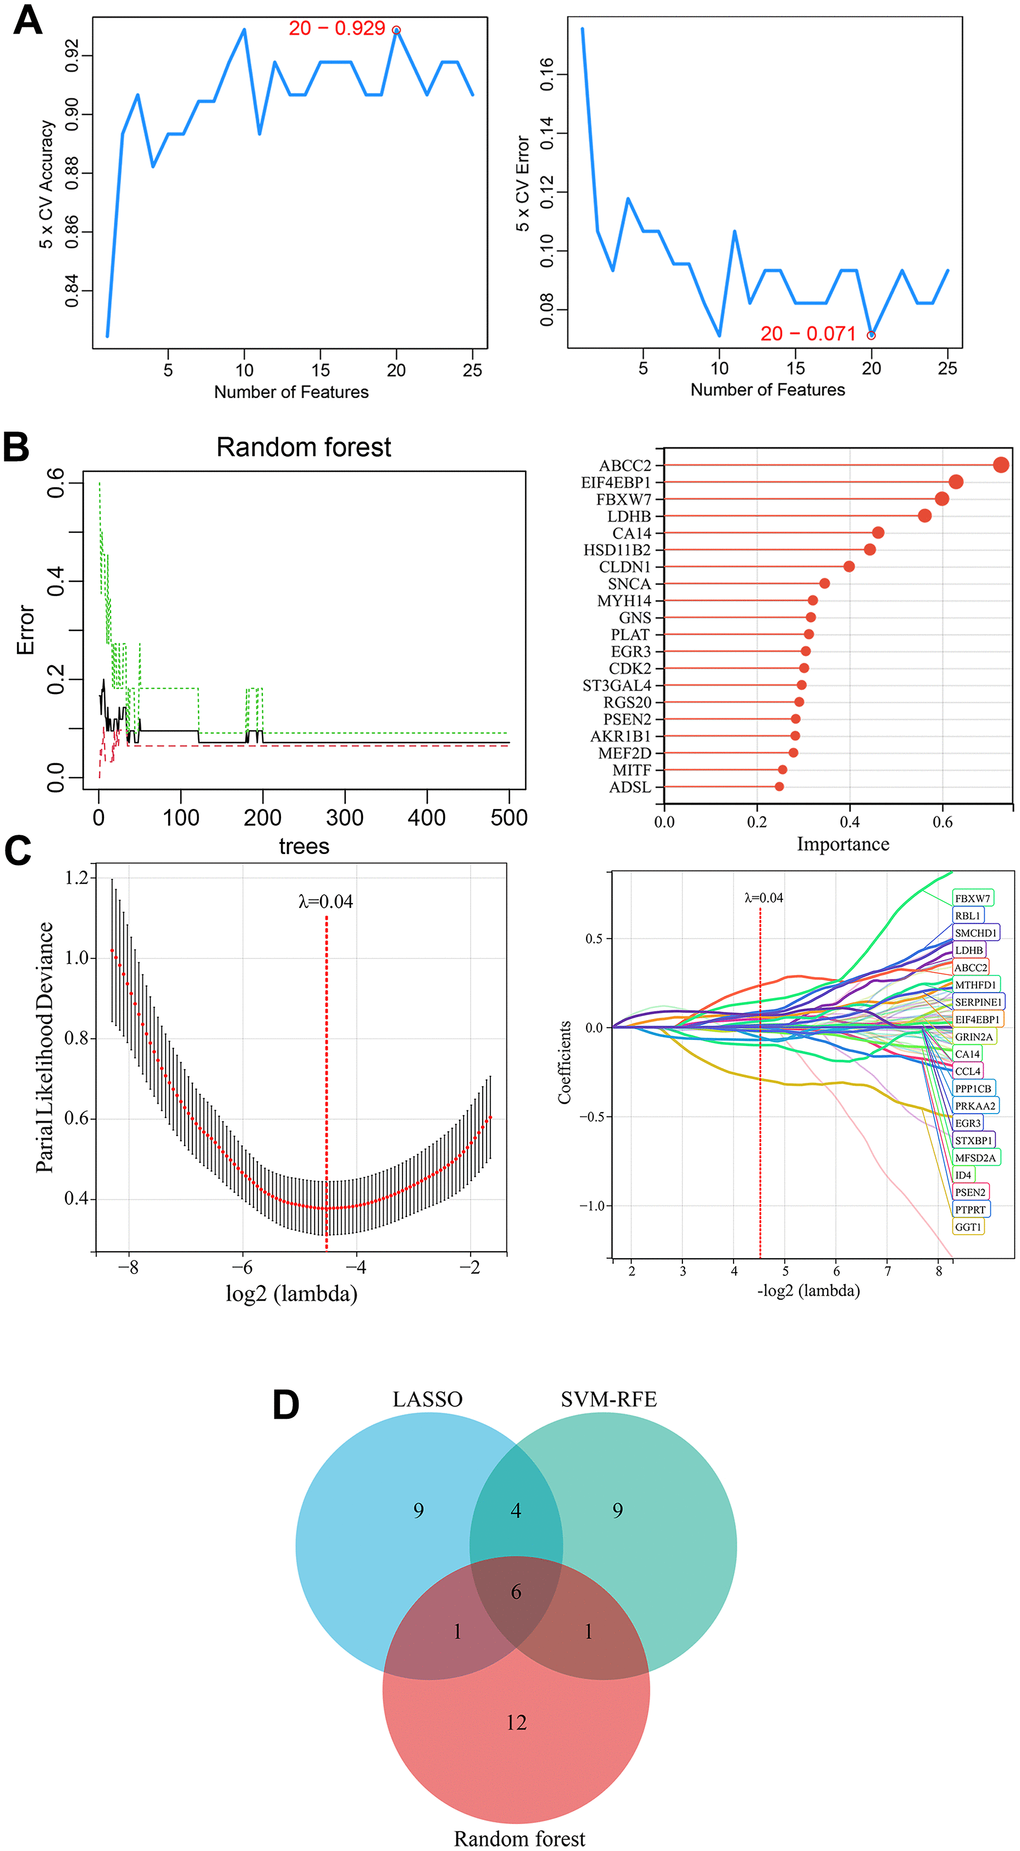 Identification of melanoma-related key CRGs by machine learning approaches. (A) Feature CRG selection using SVM-RFE algorithm. (B) Importance ranking of CRGs using a random forest algorithm. The top 20 CRGs ranked by importance were selected as feature genes. (C) Selection of melanoma-associated feature genes using LASSO regression model. (D) Identification of melanoma-related key CRGs. The overlapping feature genes (CRGs) from the three machine learning approaches were defined as melanoma-related key CRGs.